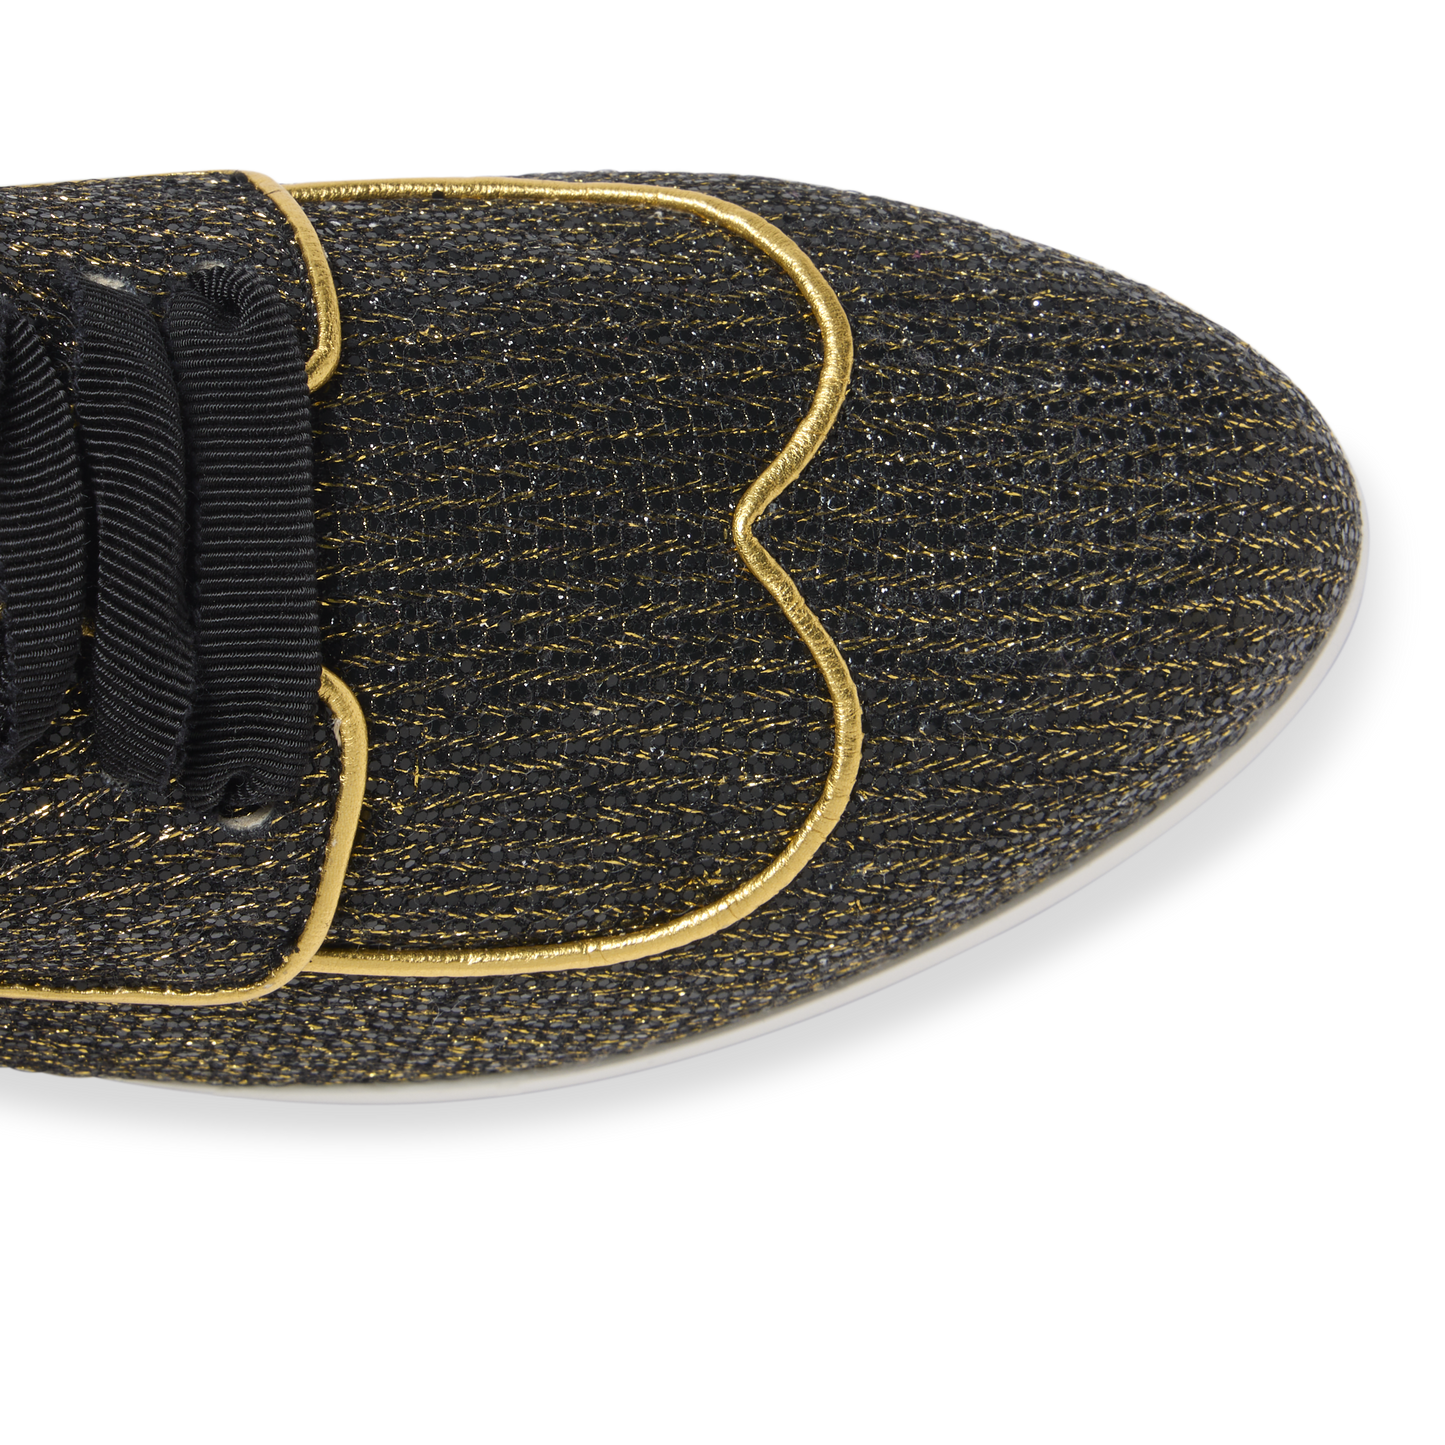 Wanderlust Sneaker in Black and Gold Sparkle